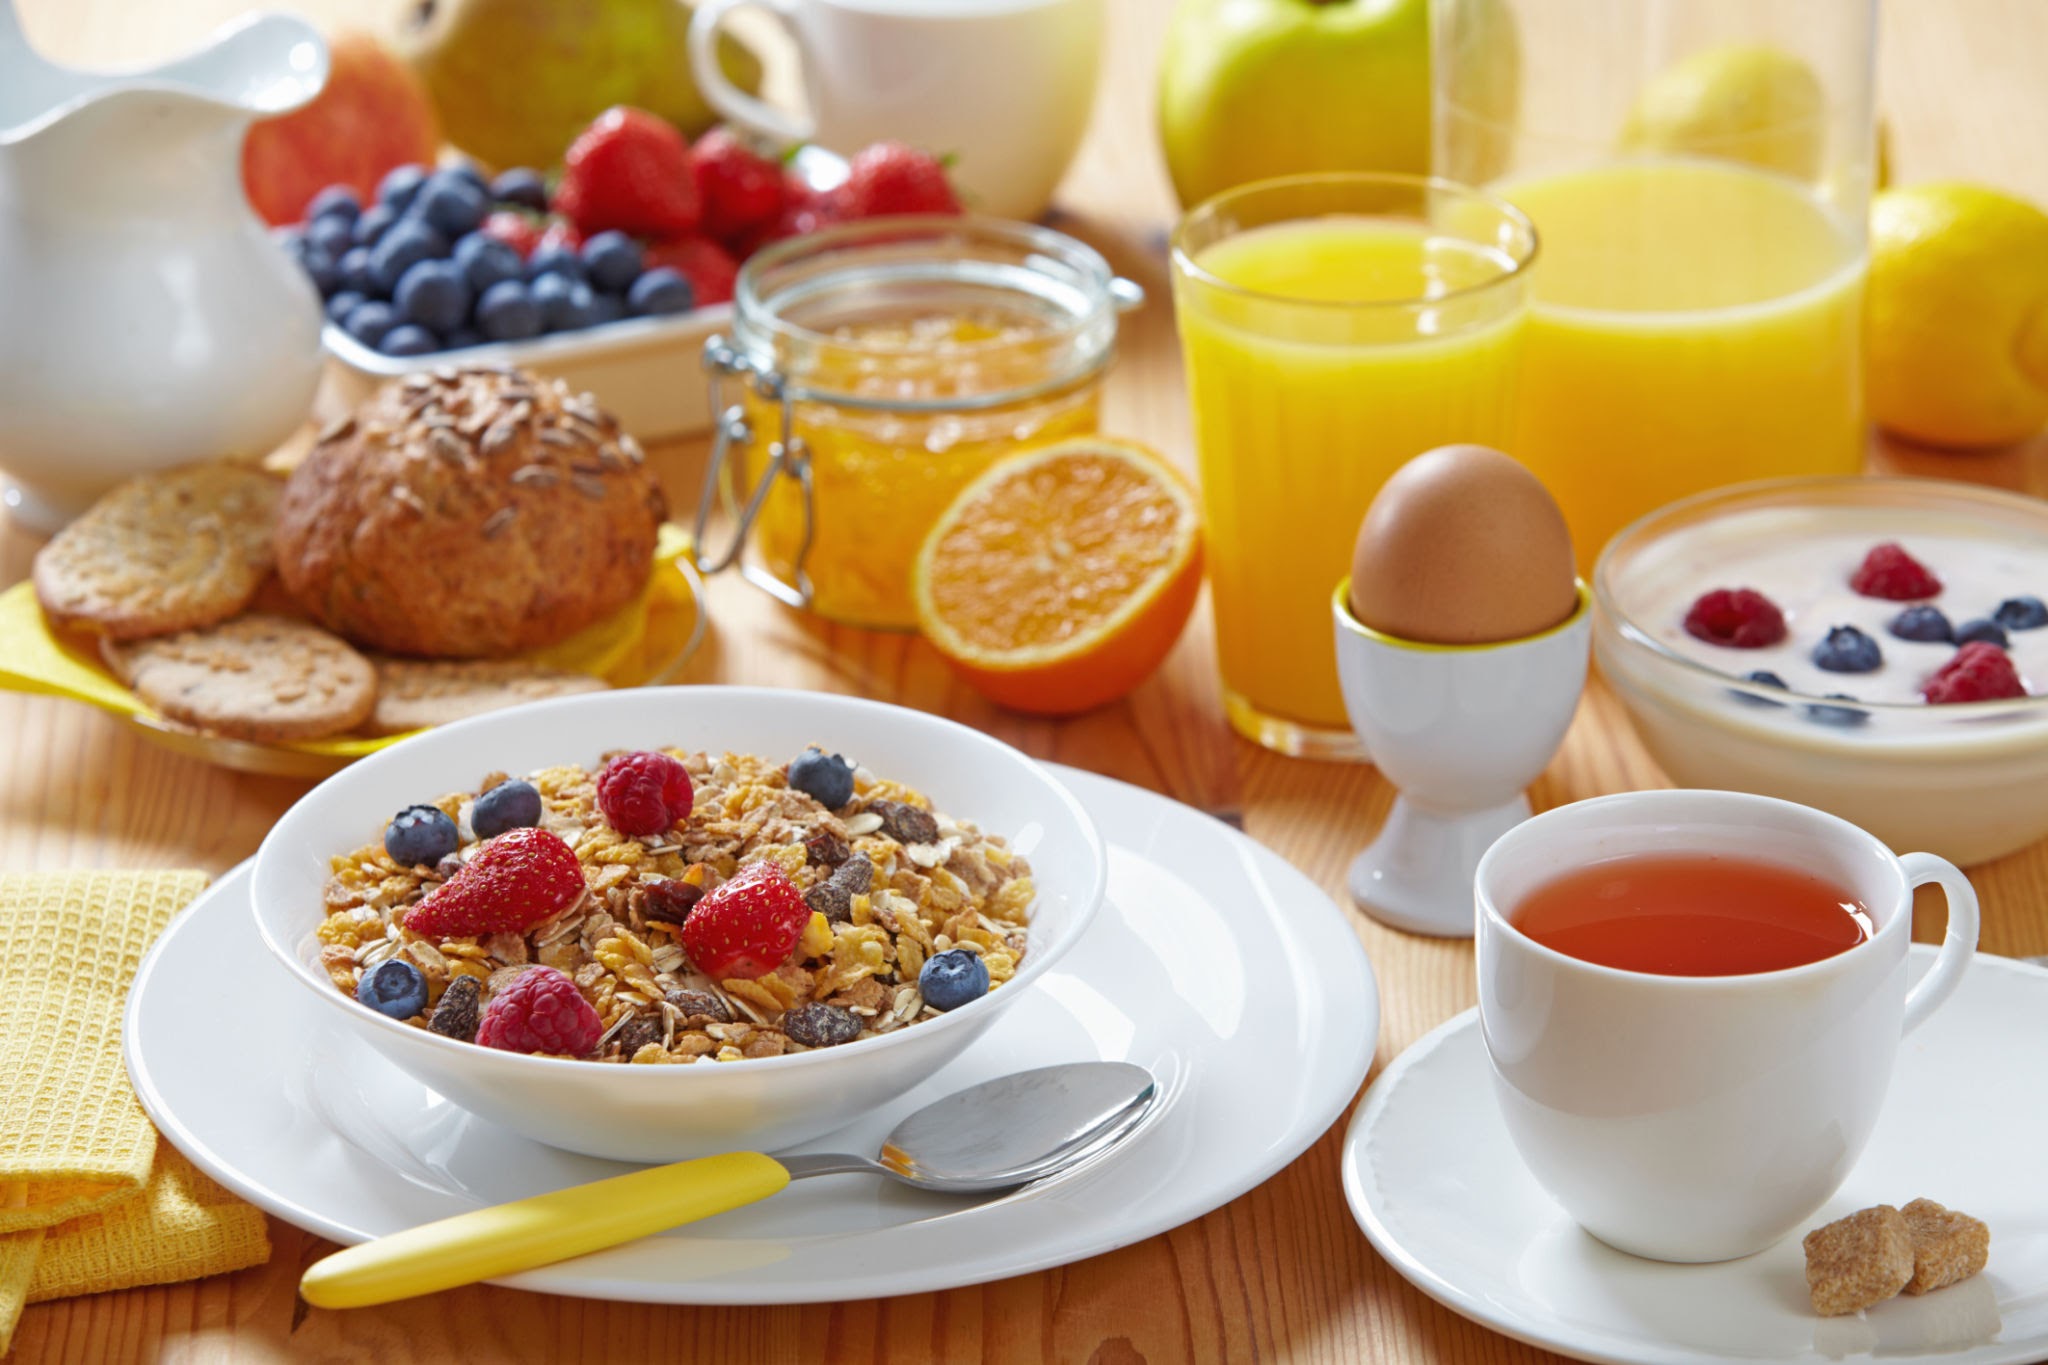 A Breakfast Combination That Could Help to Lower Cholesterol